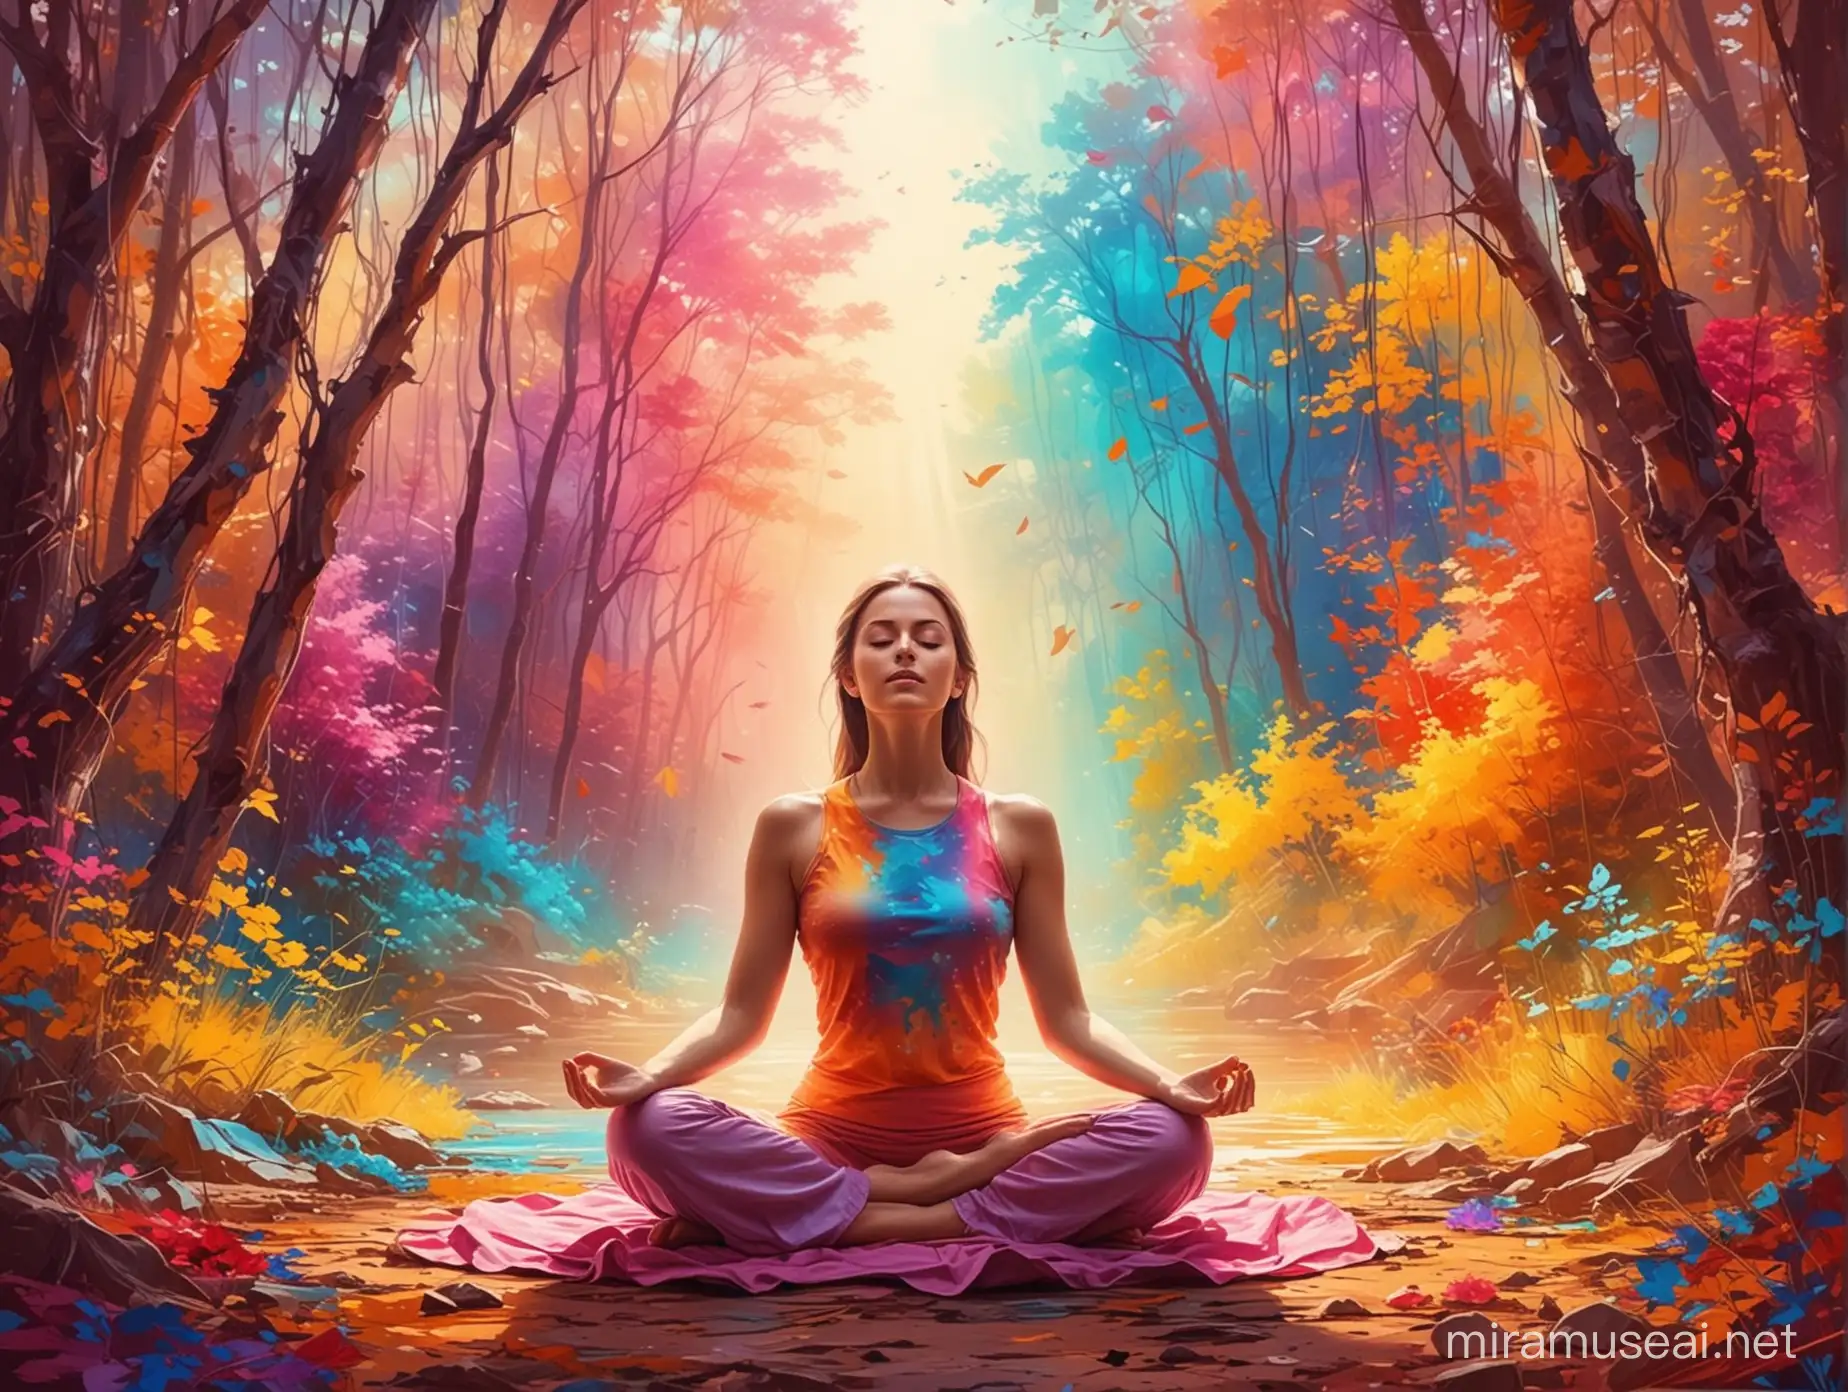 bright colors, abstract background, woman meditating in nature